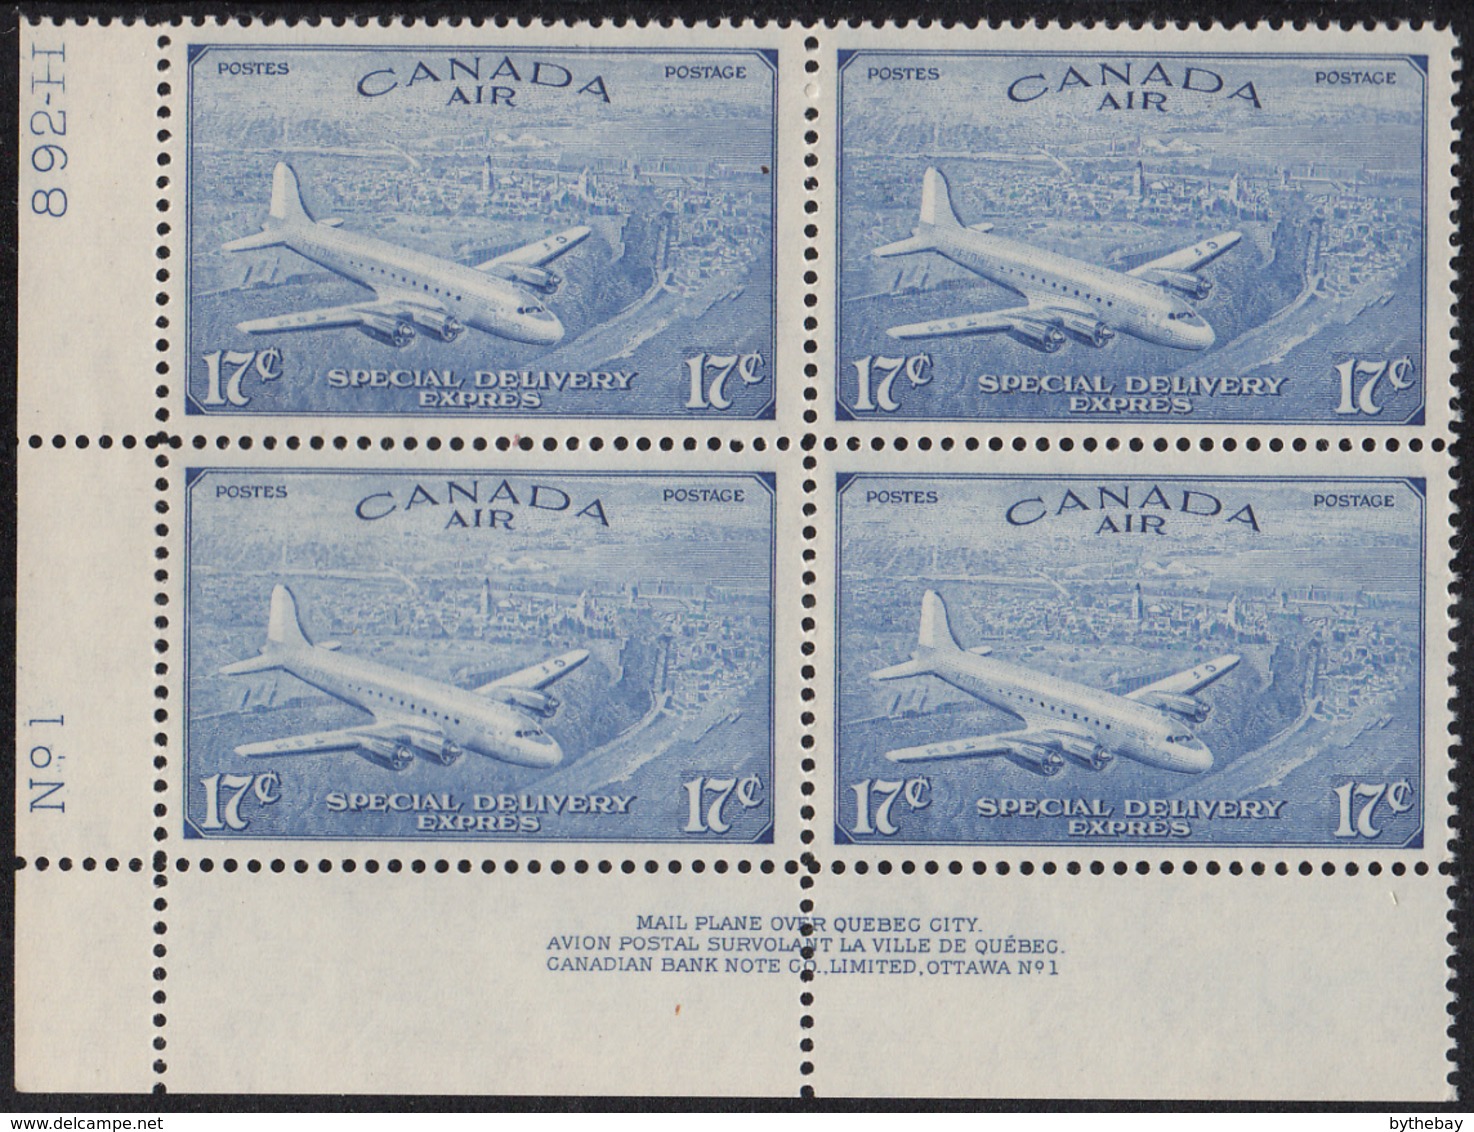 Canada 1946 MNH Sc CE3 17c D.C. 4-M Airplane Plate 1 Lower Left Plate Block - Lufpost-Zuschlag